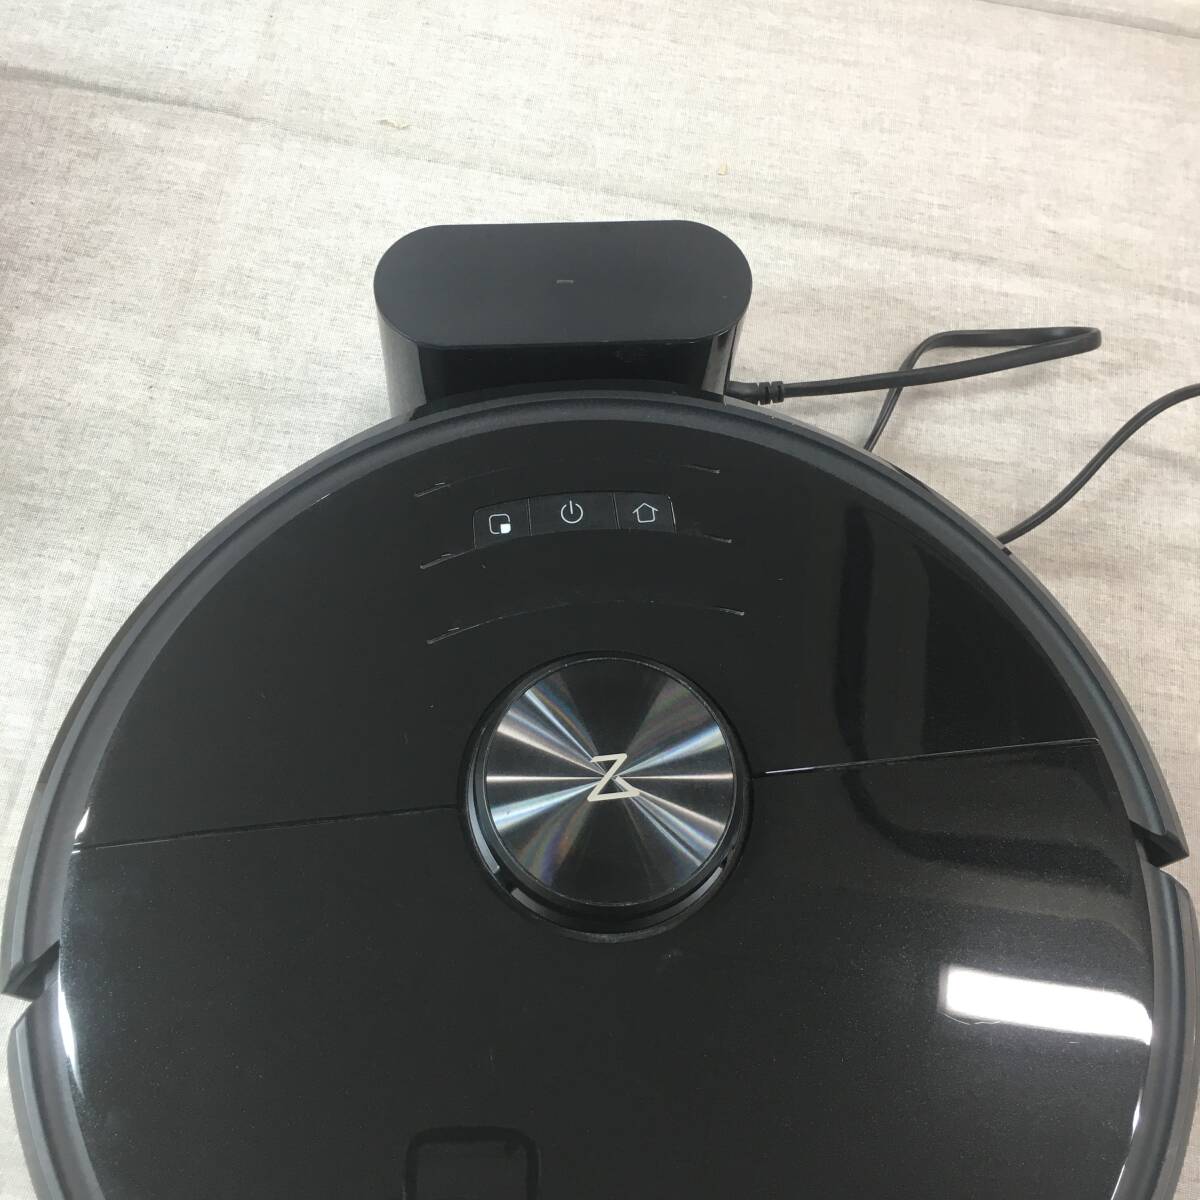  present condition goods Robot lock (Roborock) S6 MaxV black robot vacuum cleaner see protection camera water .. correspondence high precision Laser sensor 2500Pa powerful absorption quiet sound 